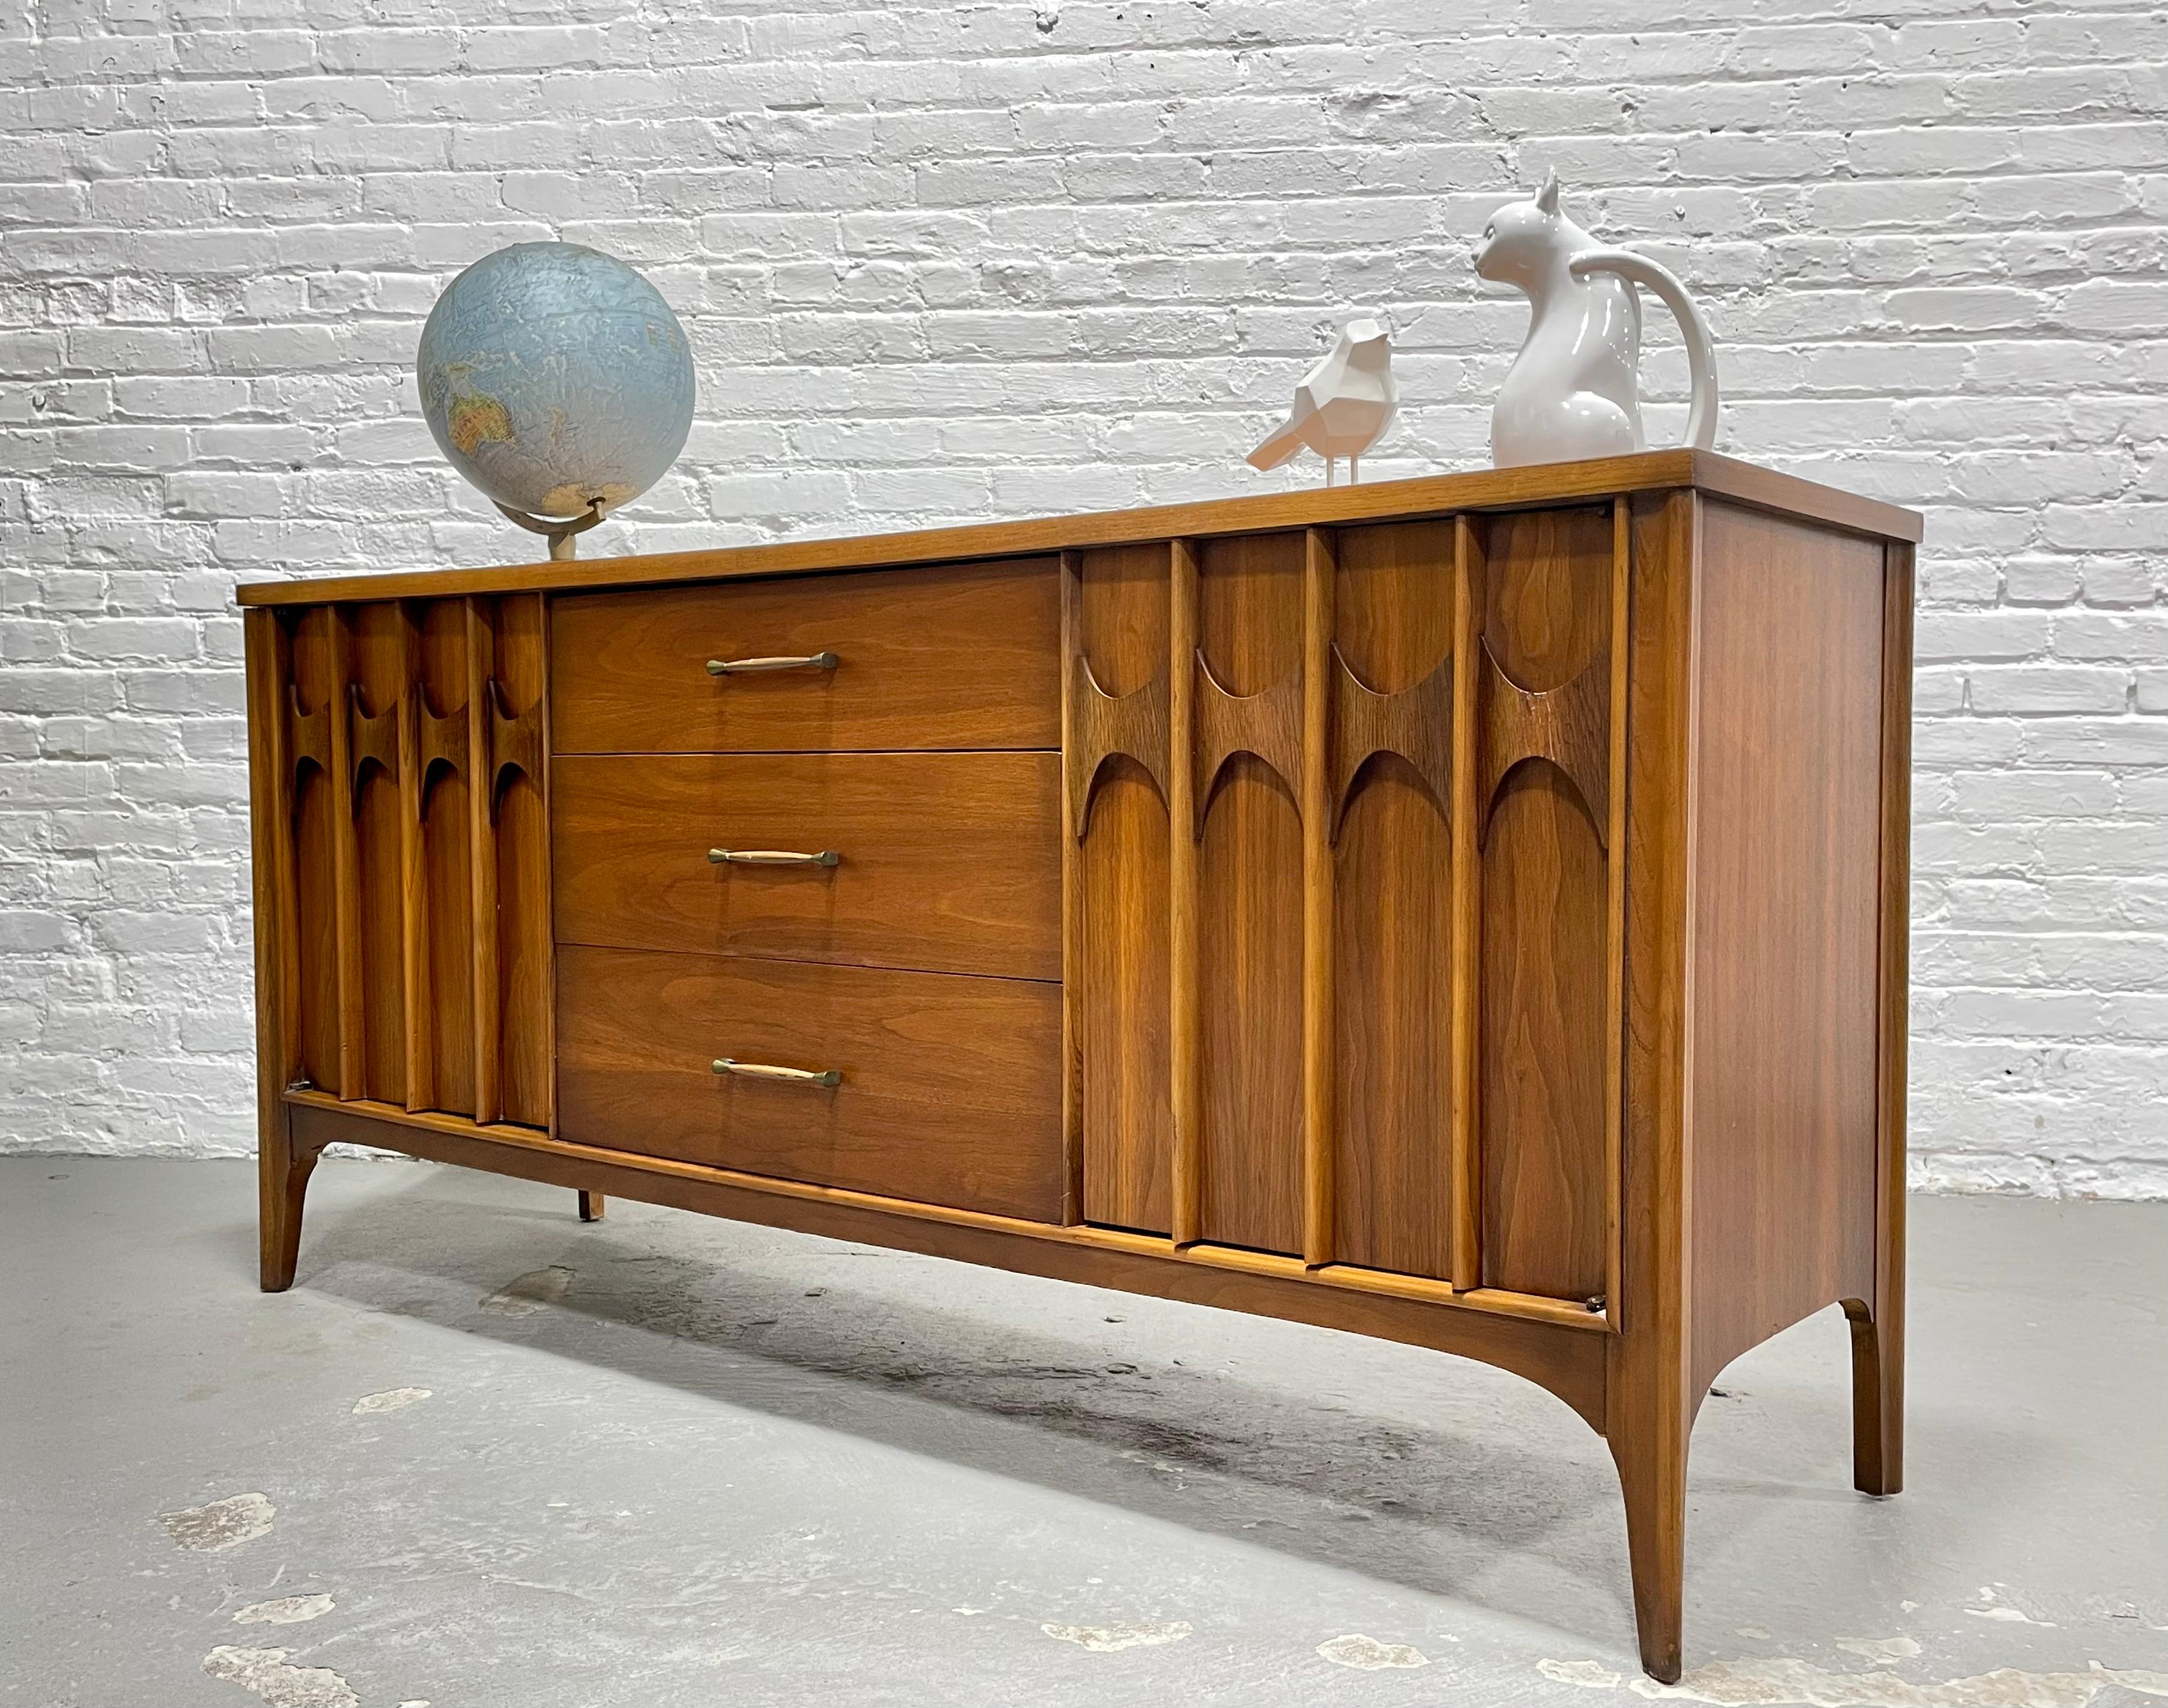 SCULPTED Mid Century MODERN CREDENZA / Long Dresser by Kent Coffey Perspecta, c. 8